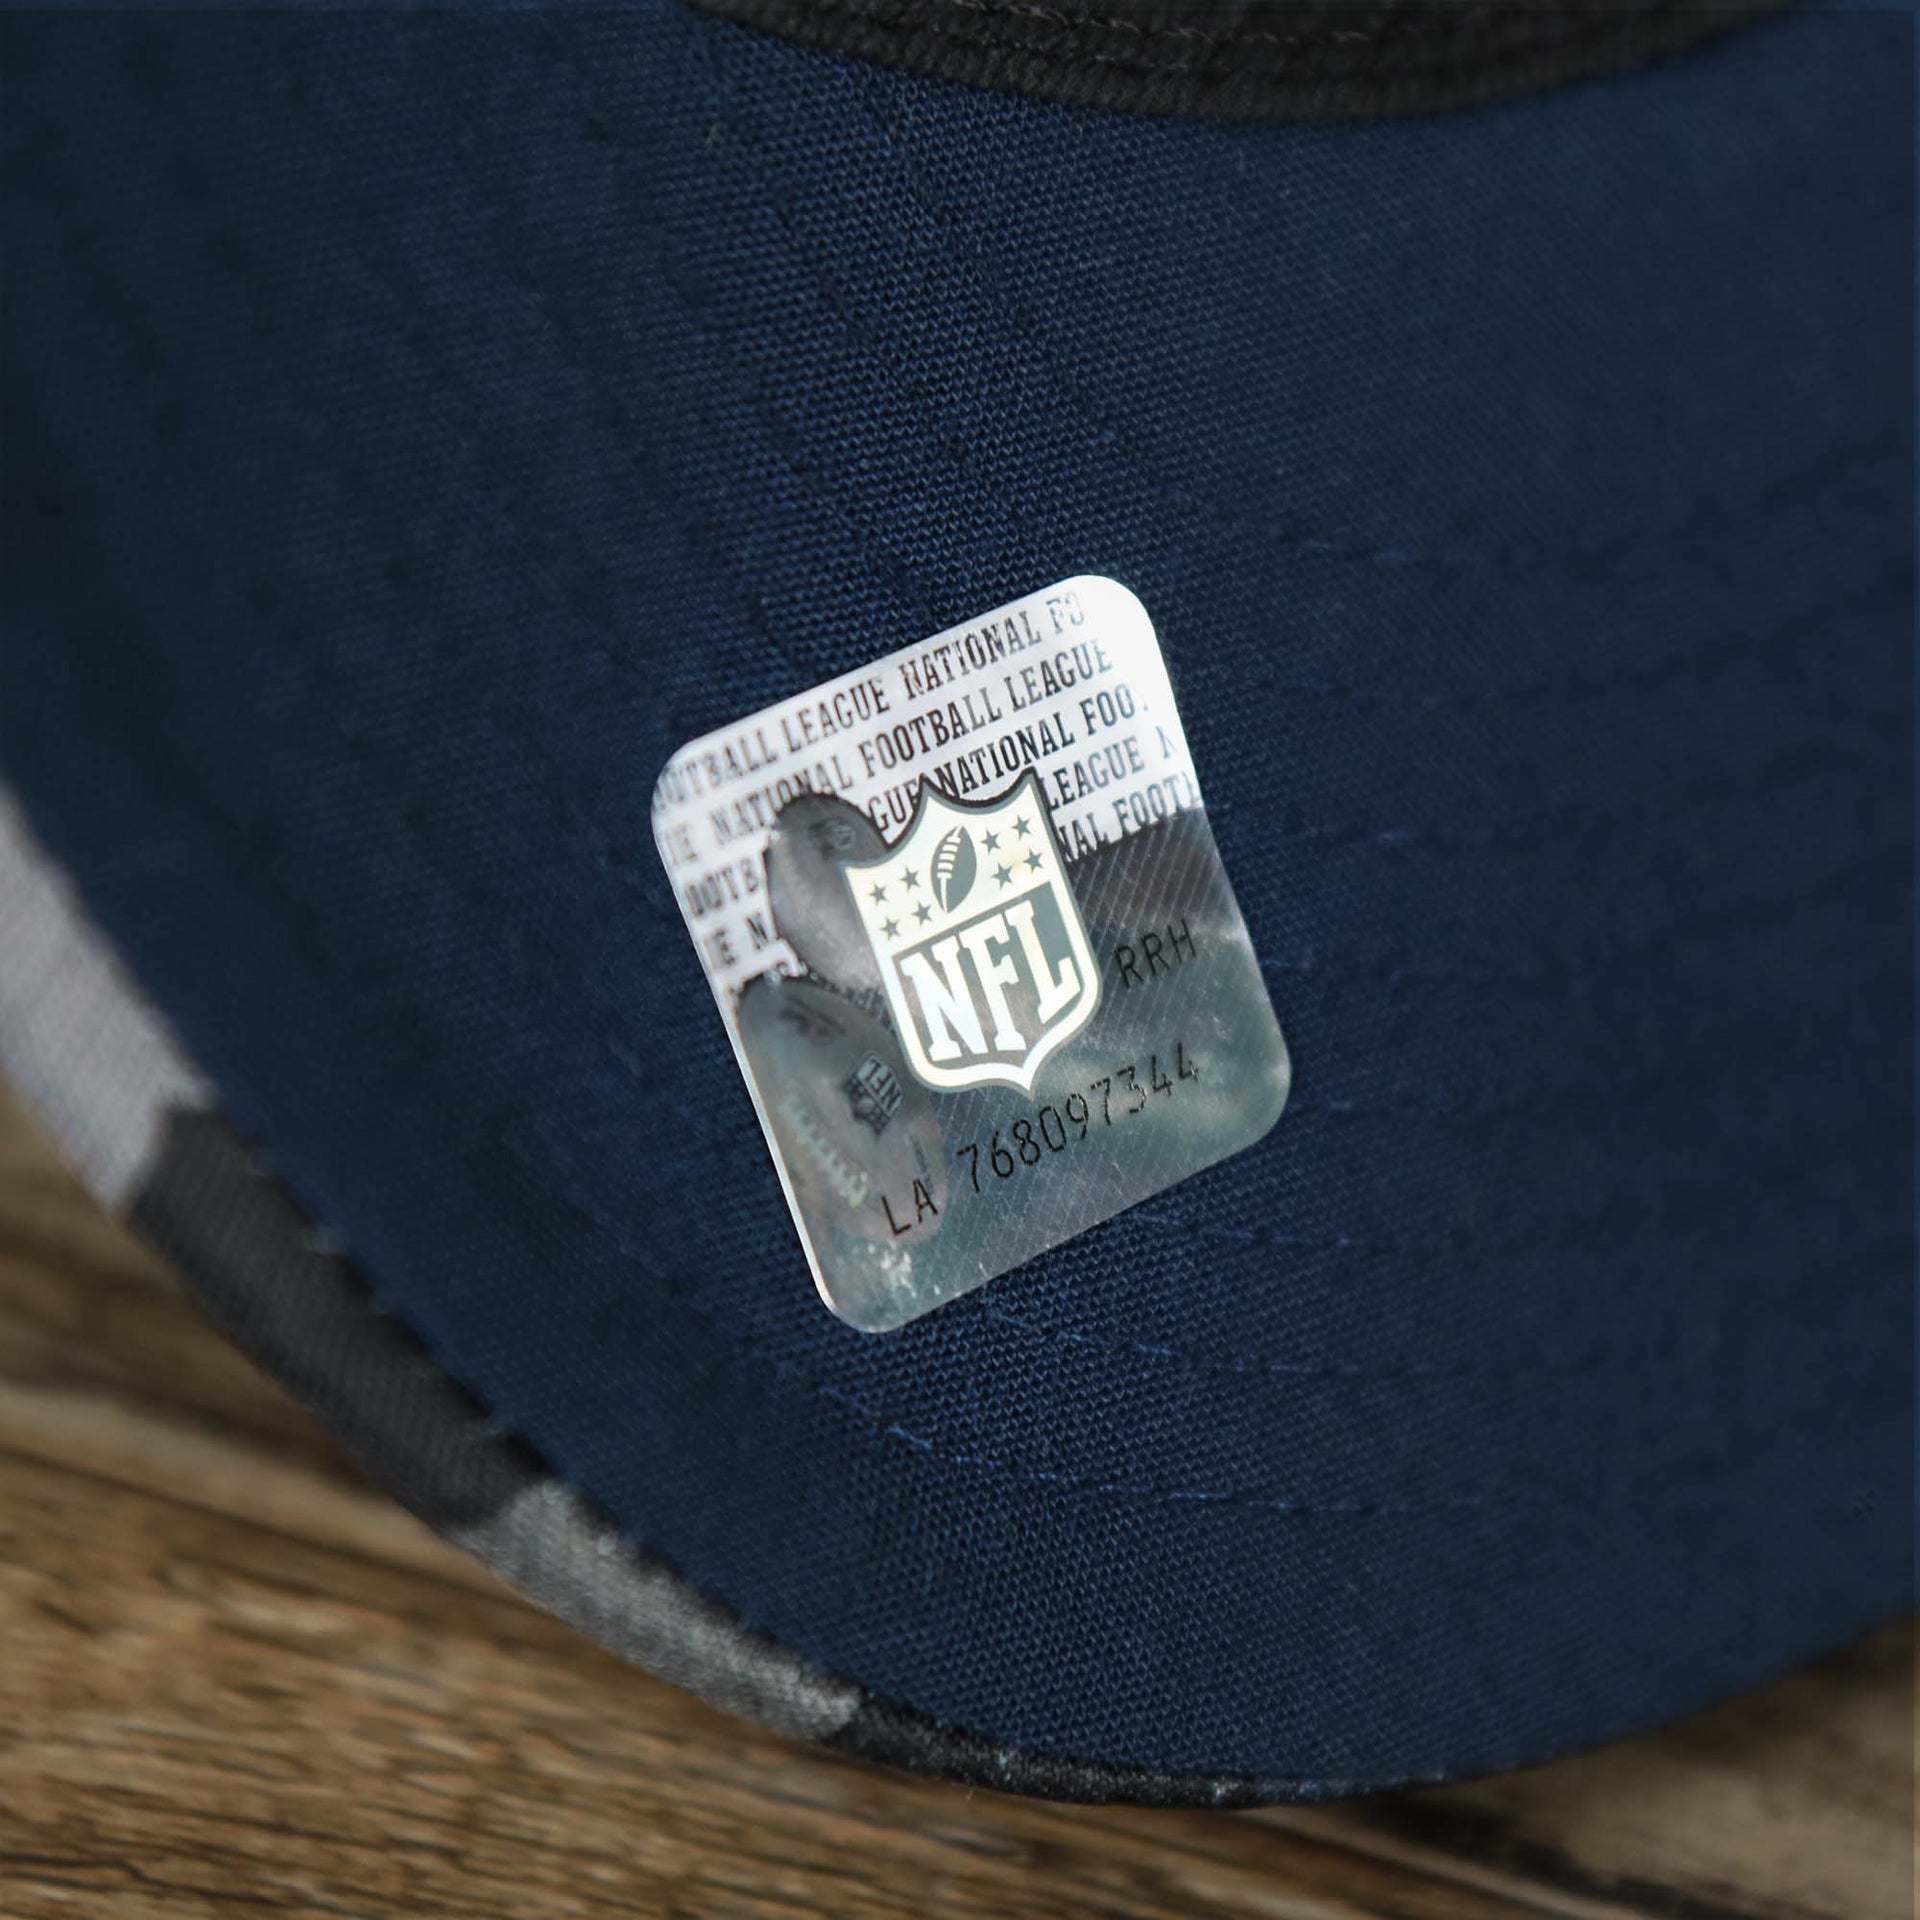 The NFL Sticker on the visor of the Seattle Seahawks NFL OnField Summer Training 2022 Camo 9Fifty Snapback | Navy Blue Camo 9Fifty